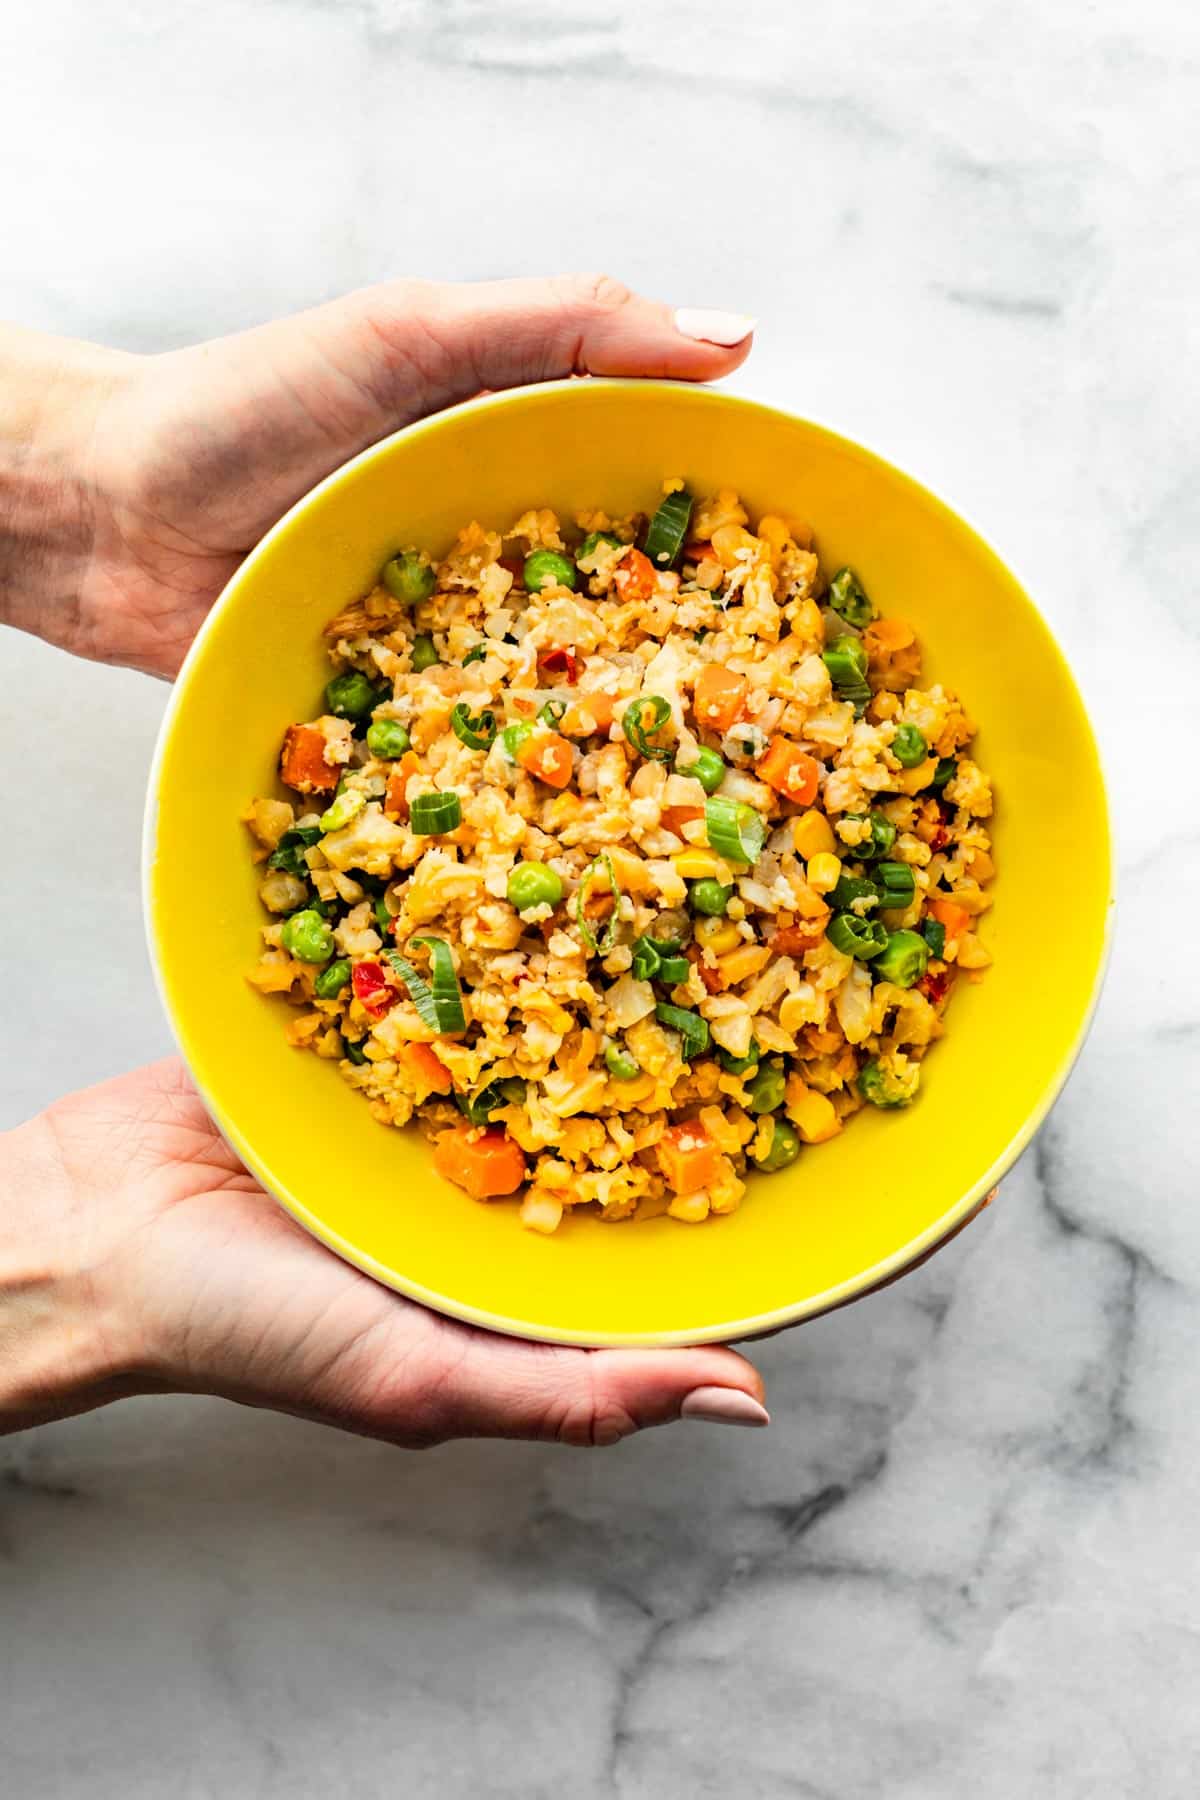 Hands holding a bowl of Cauliflower Fried Rice.